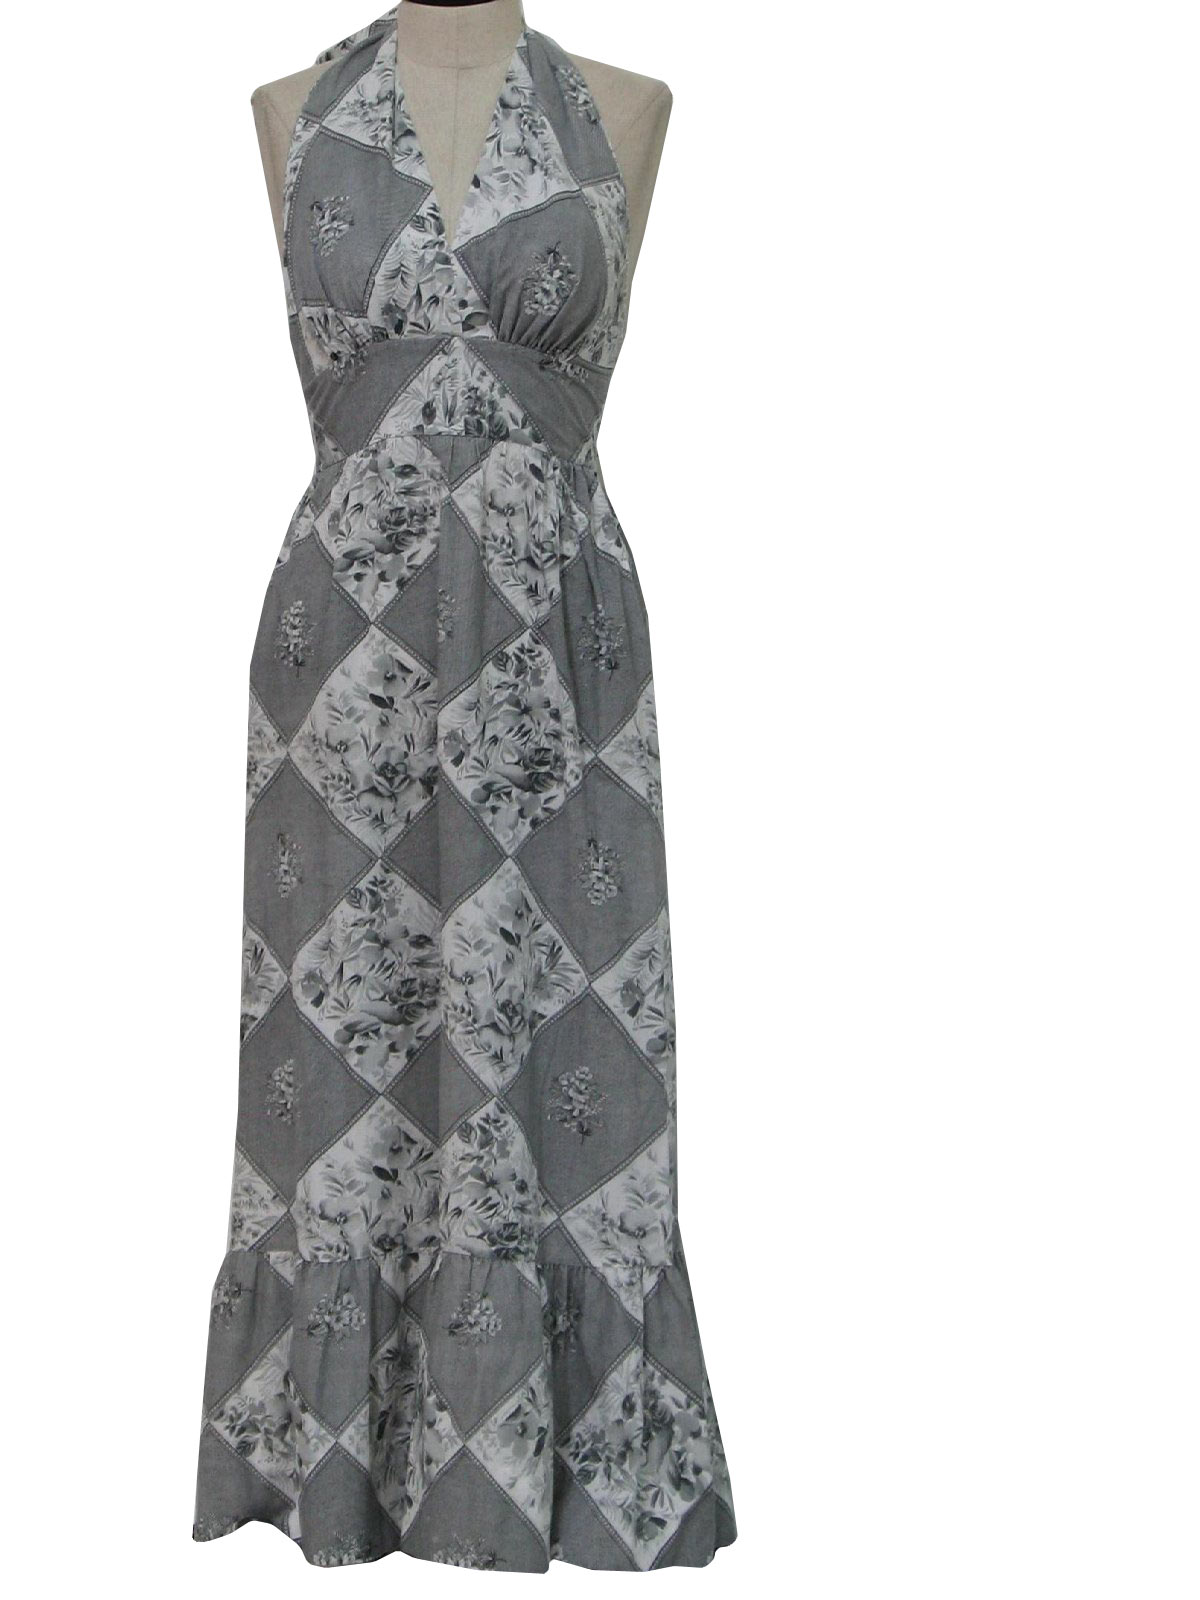 70's Hippie Dress: 70s -no label- Womens shaded grey floral and pattern ...